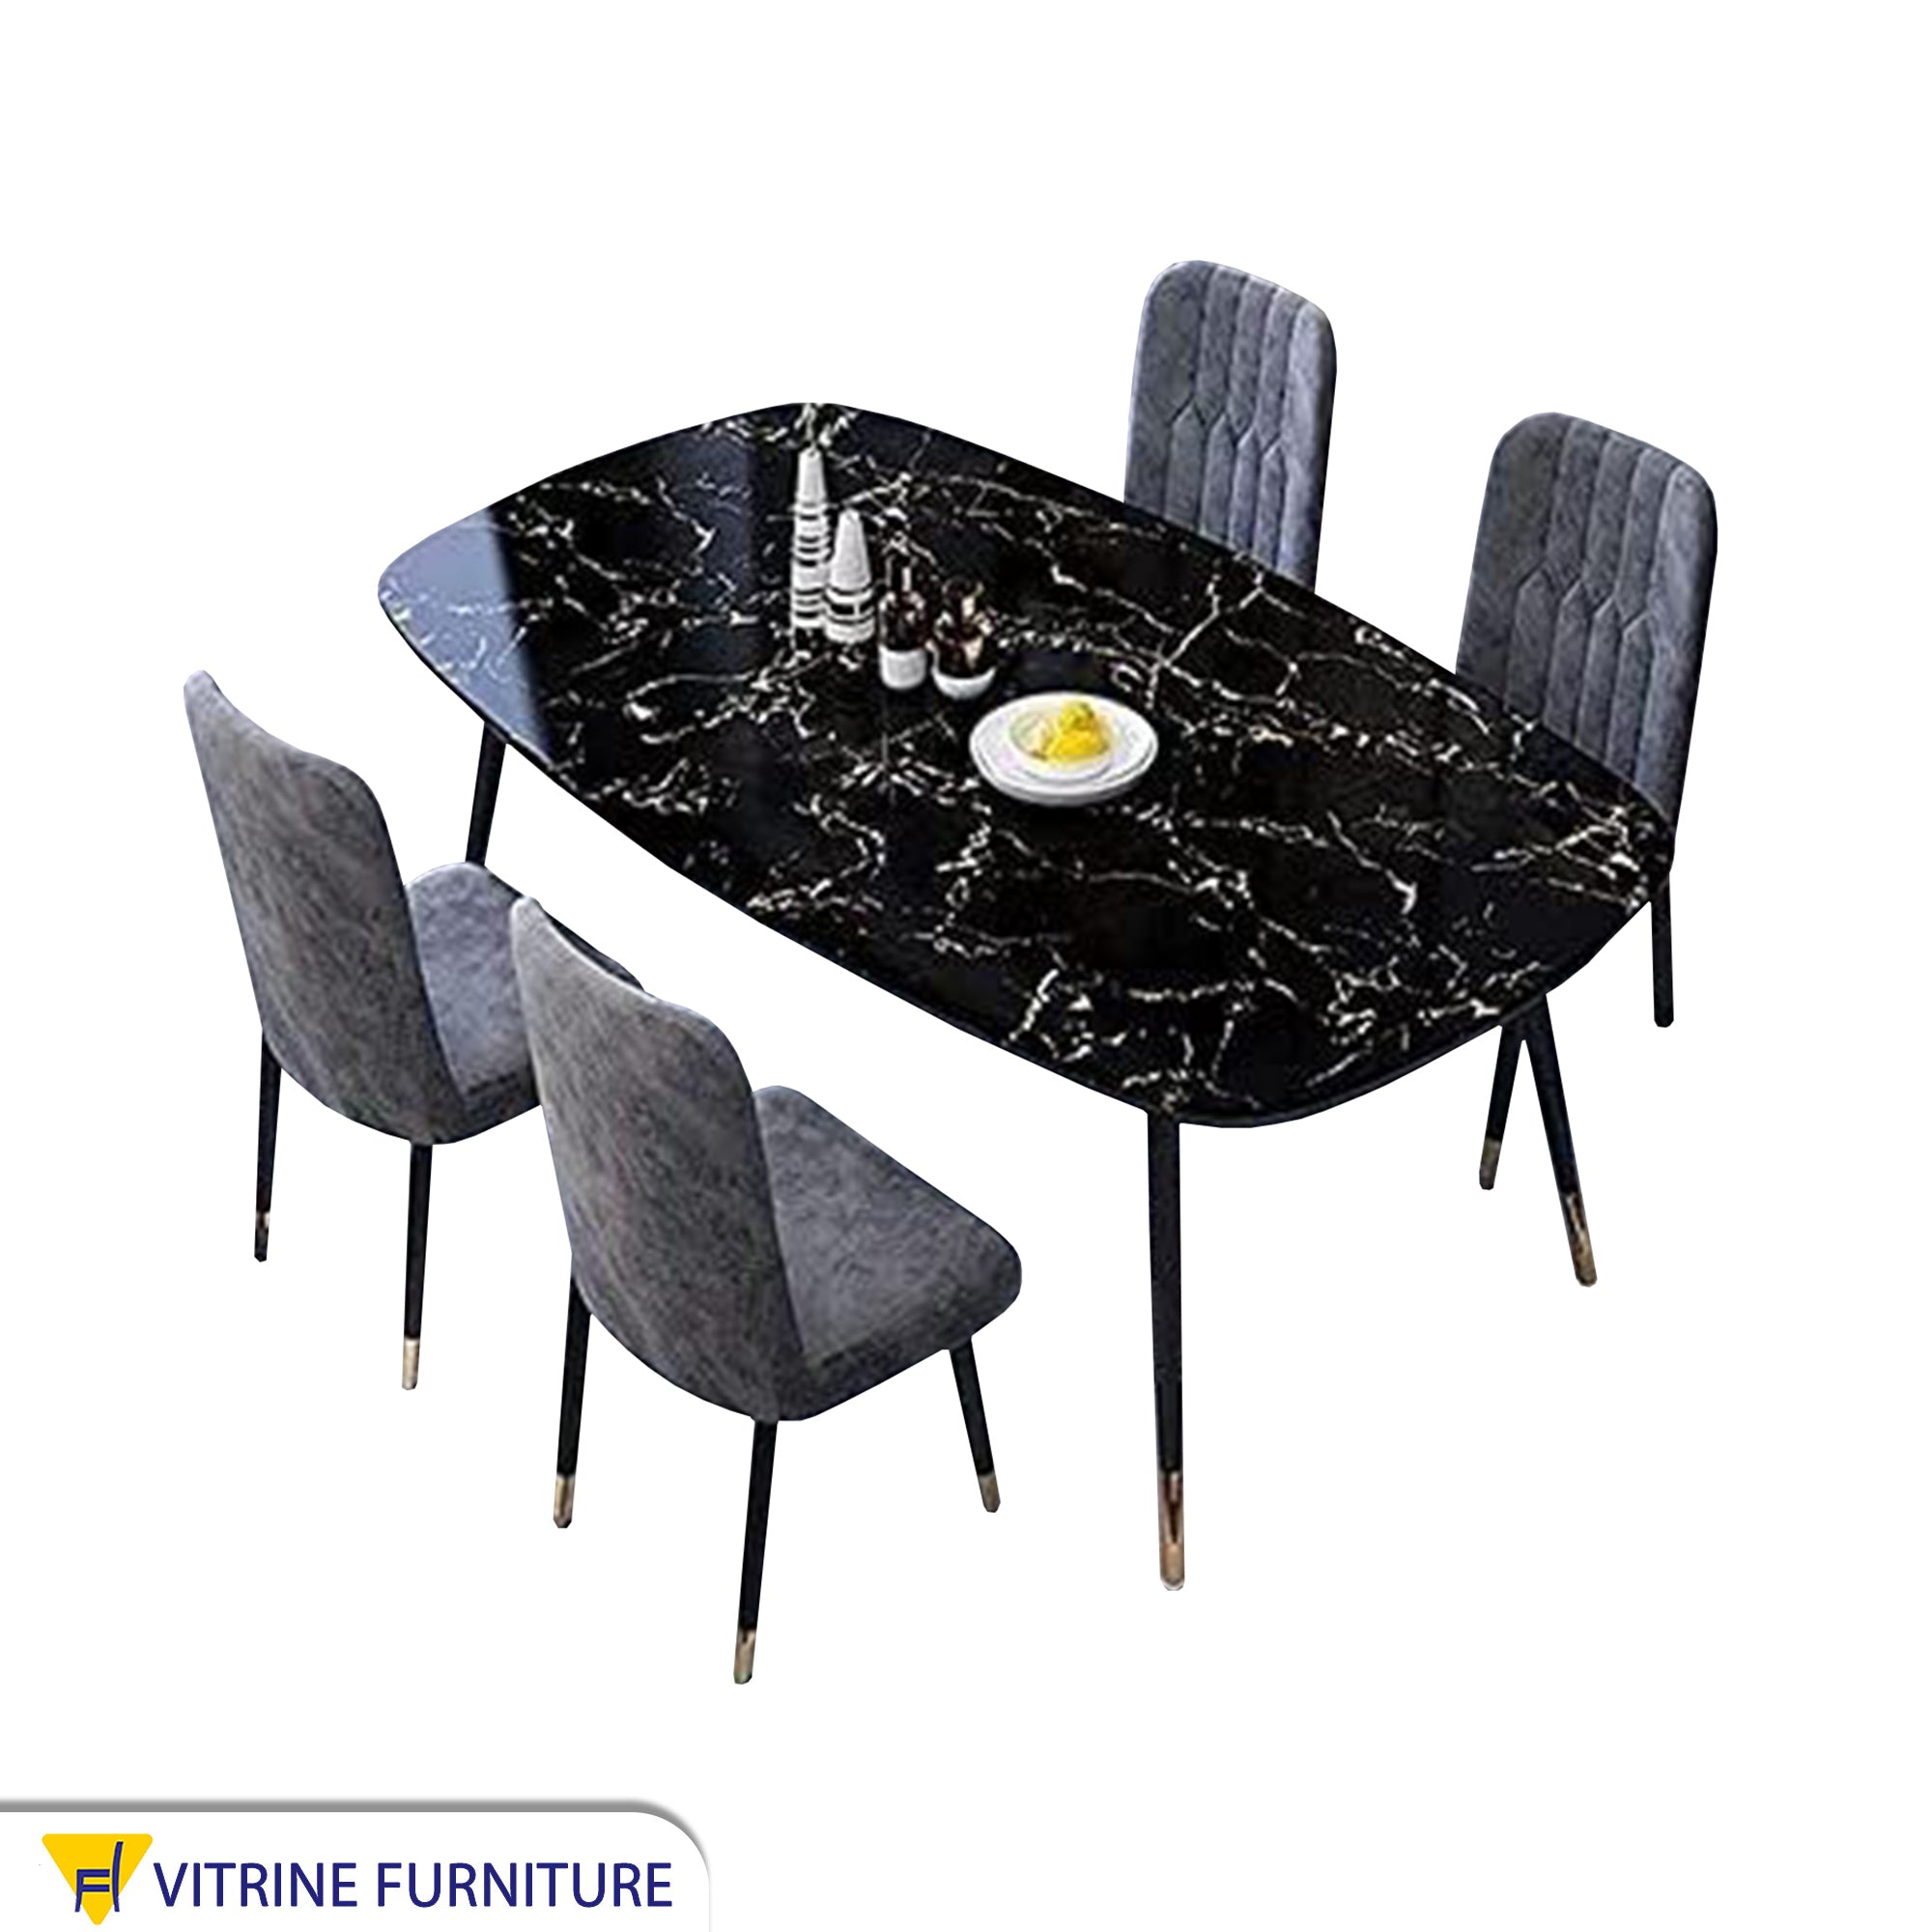 Black table decorated with white